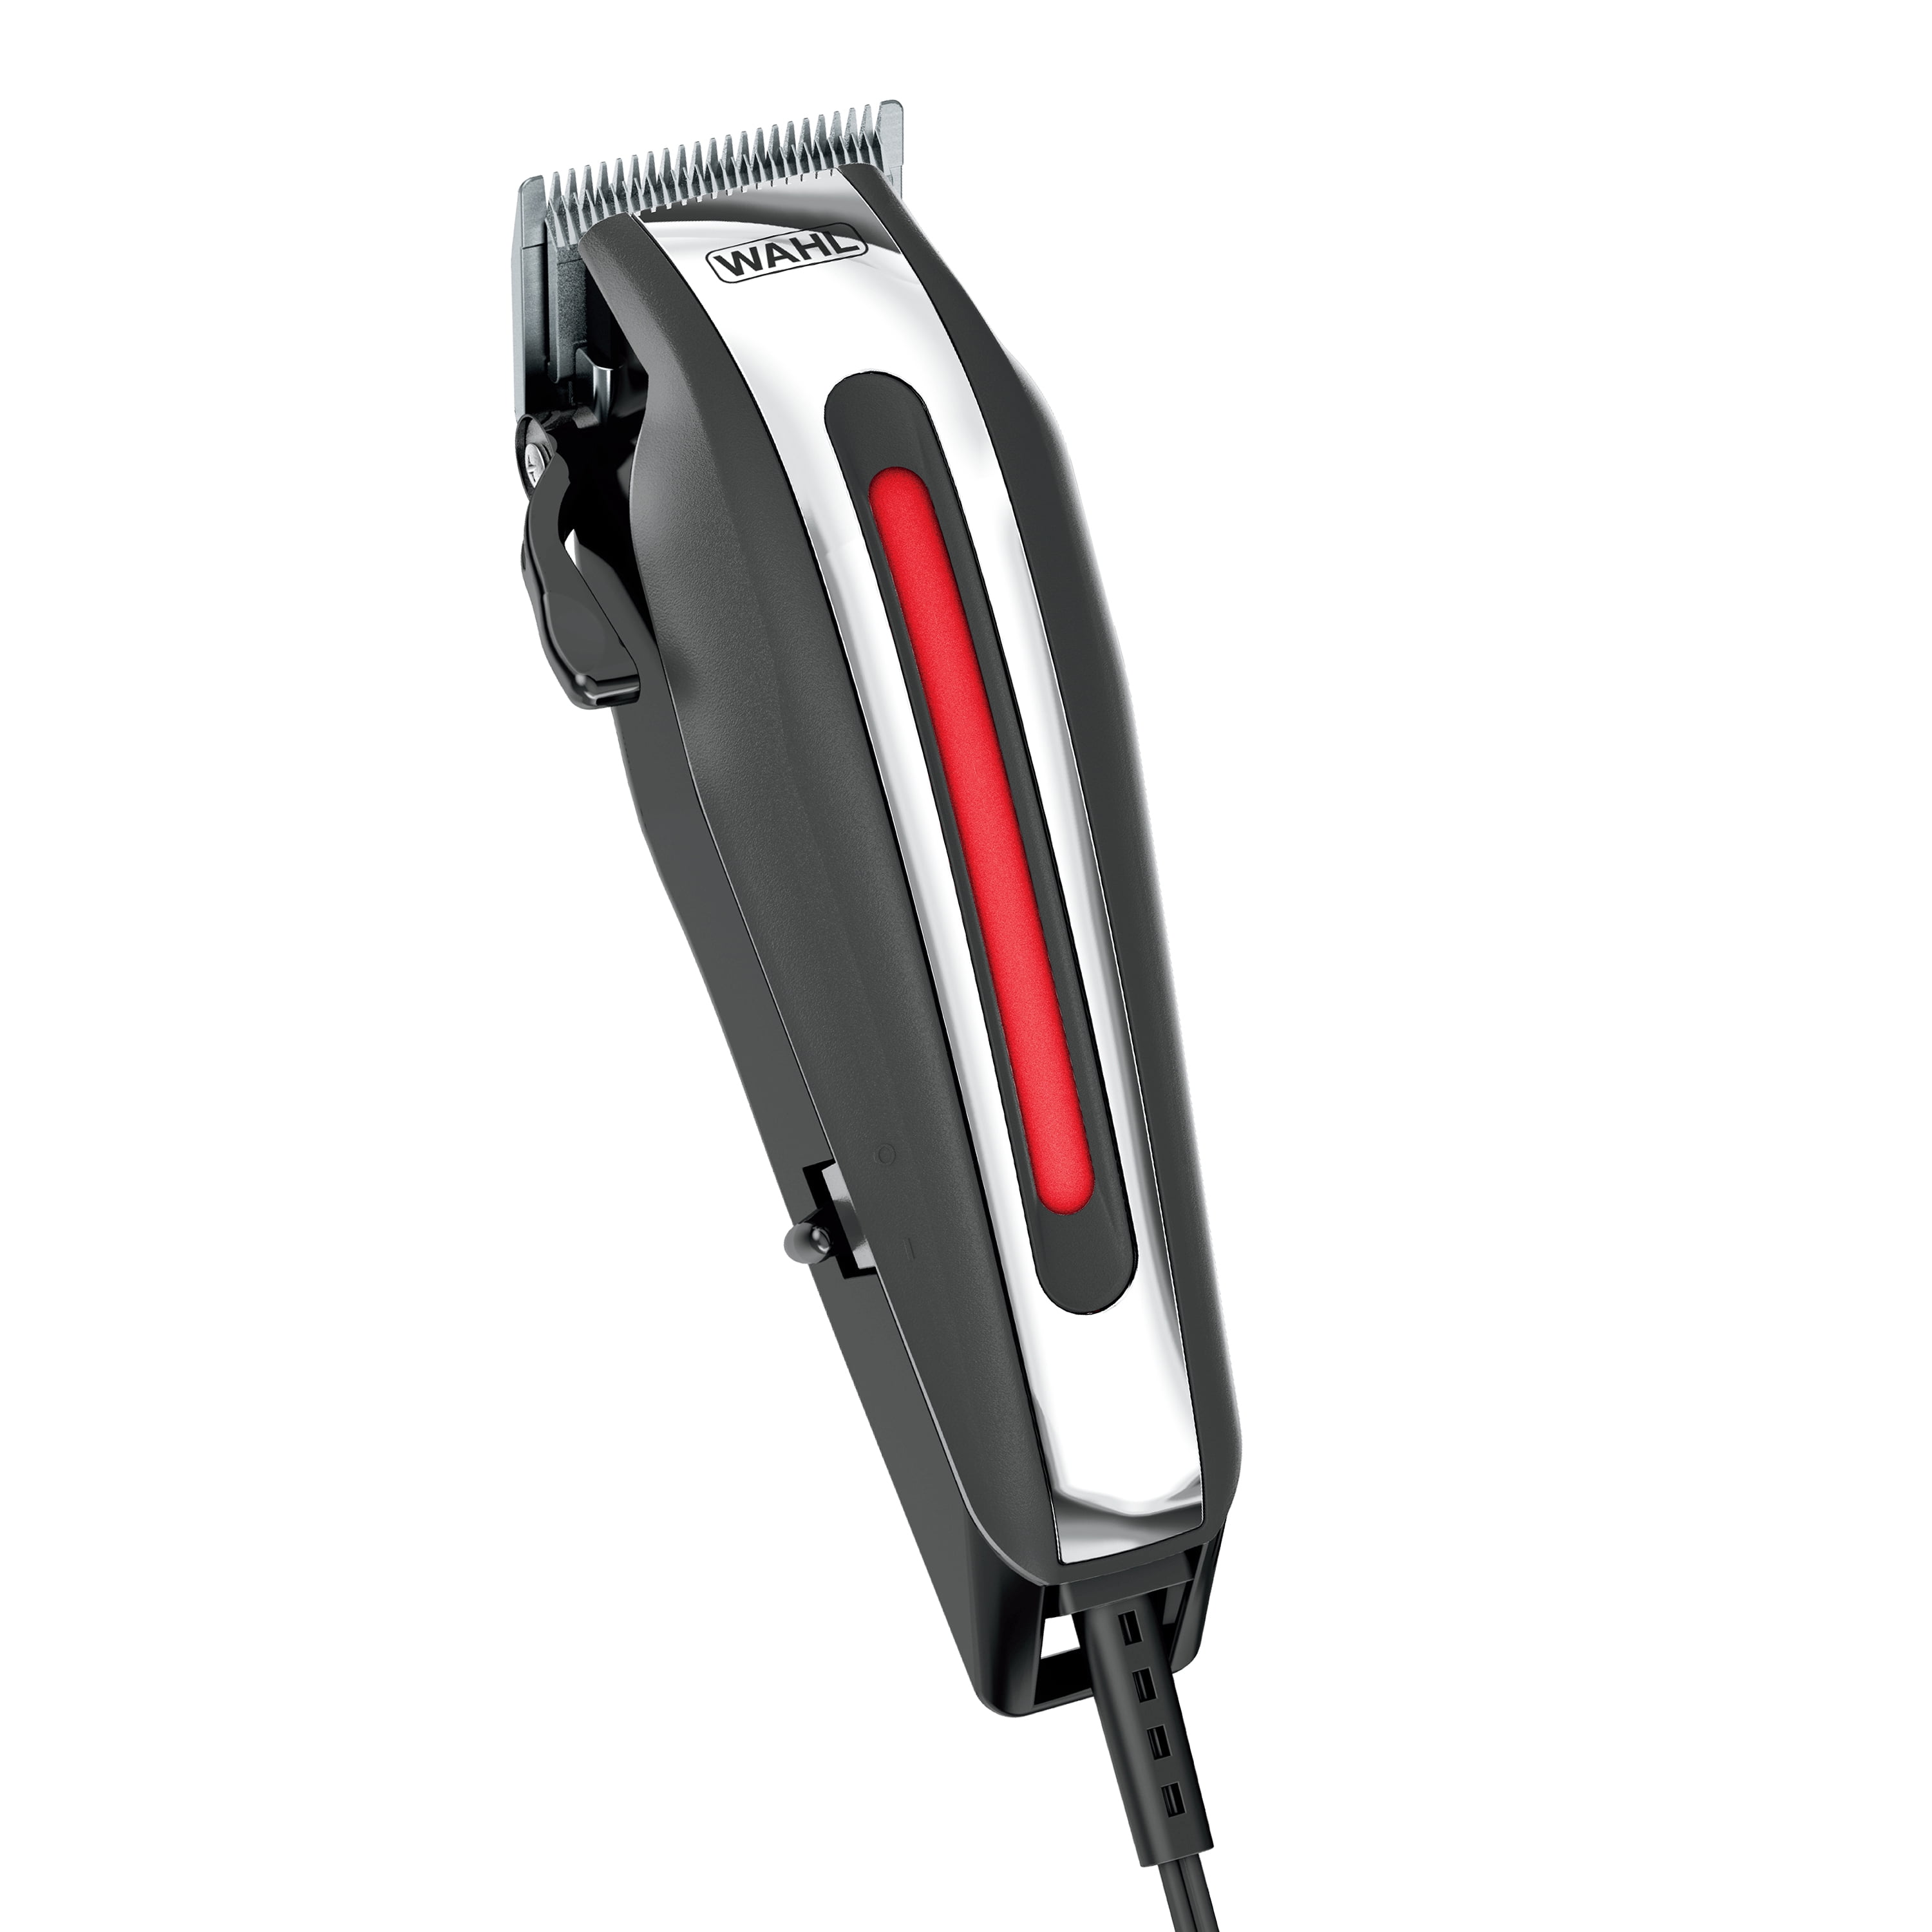 Wahl Fade Pro Corded Hair Clipper Kit, Men or Women, 17pc, Black /Red, 79790